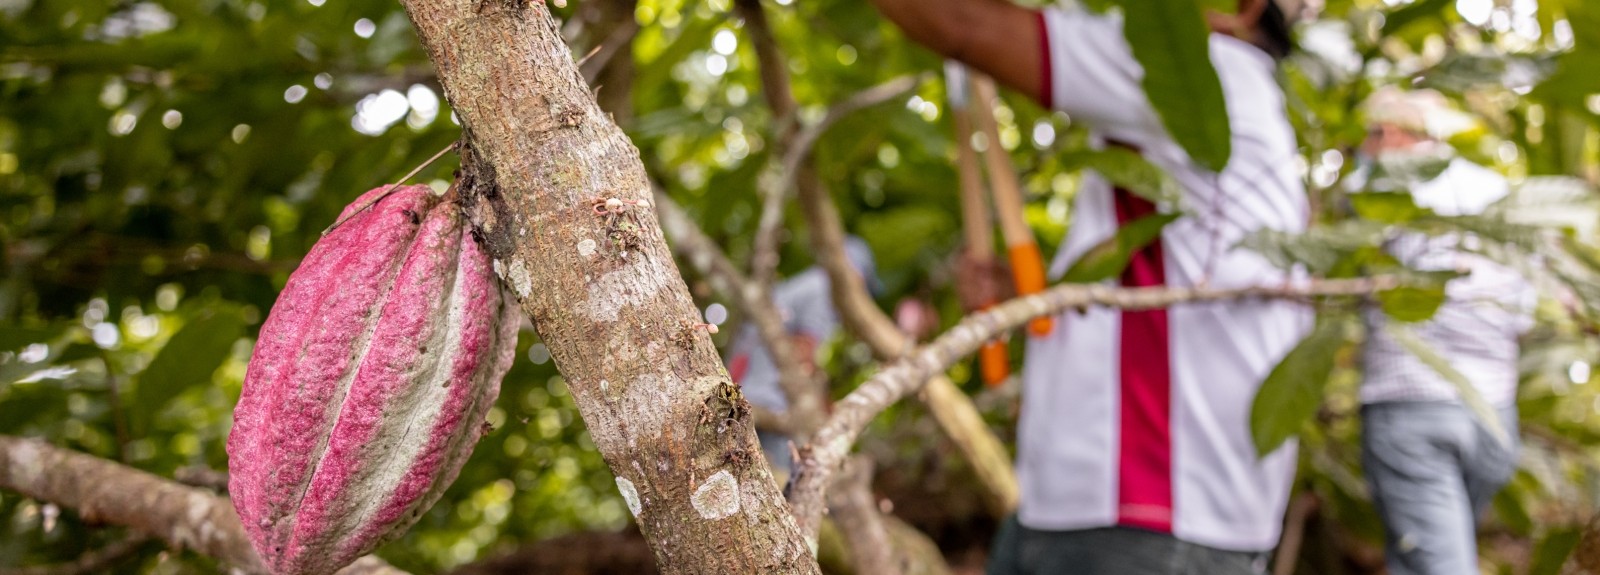 A cacao pod is in the foreground and in the background a man is pruning cacao trees